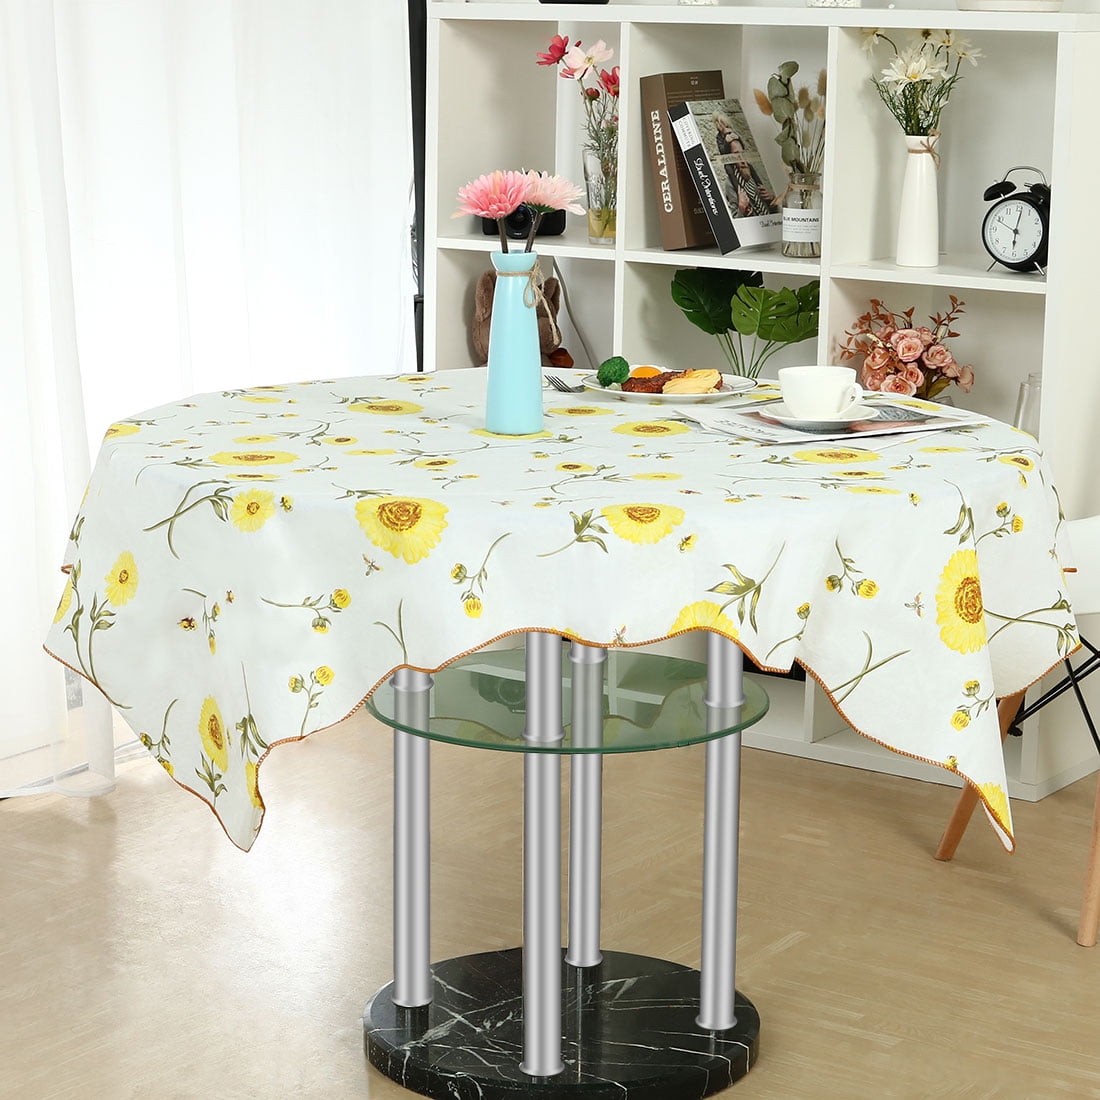 N/ A Blooming Sunflowers Round Tablecloth 60 Inch Stain and Wrinkle Resistant Washable Table Cover for Dinning Room Tabletop Decoration